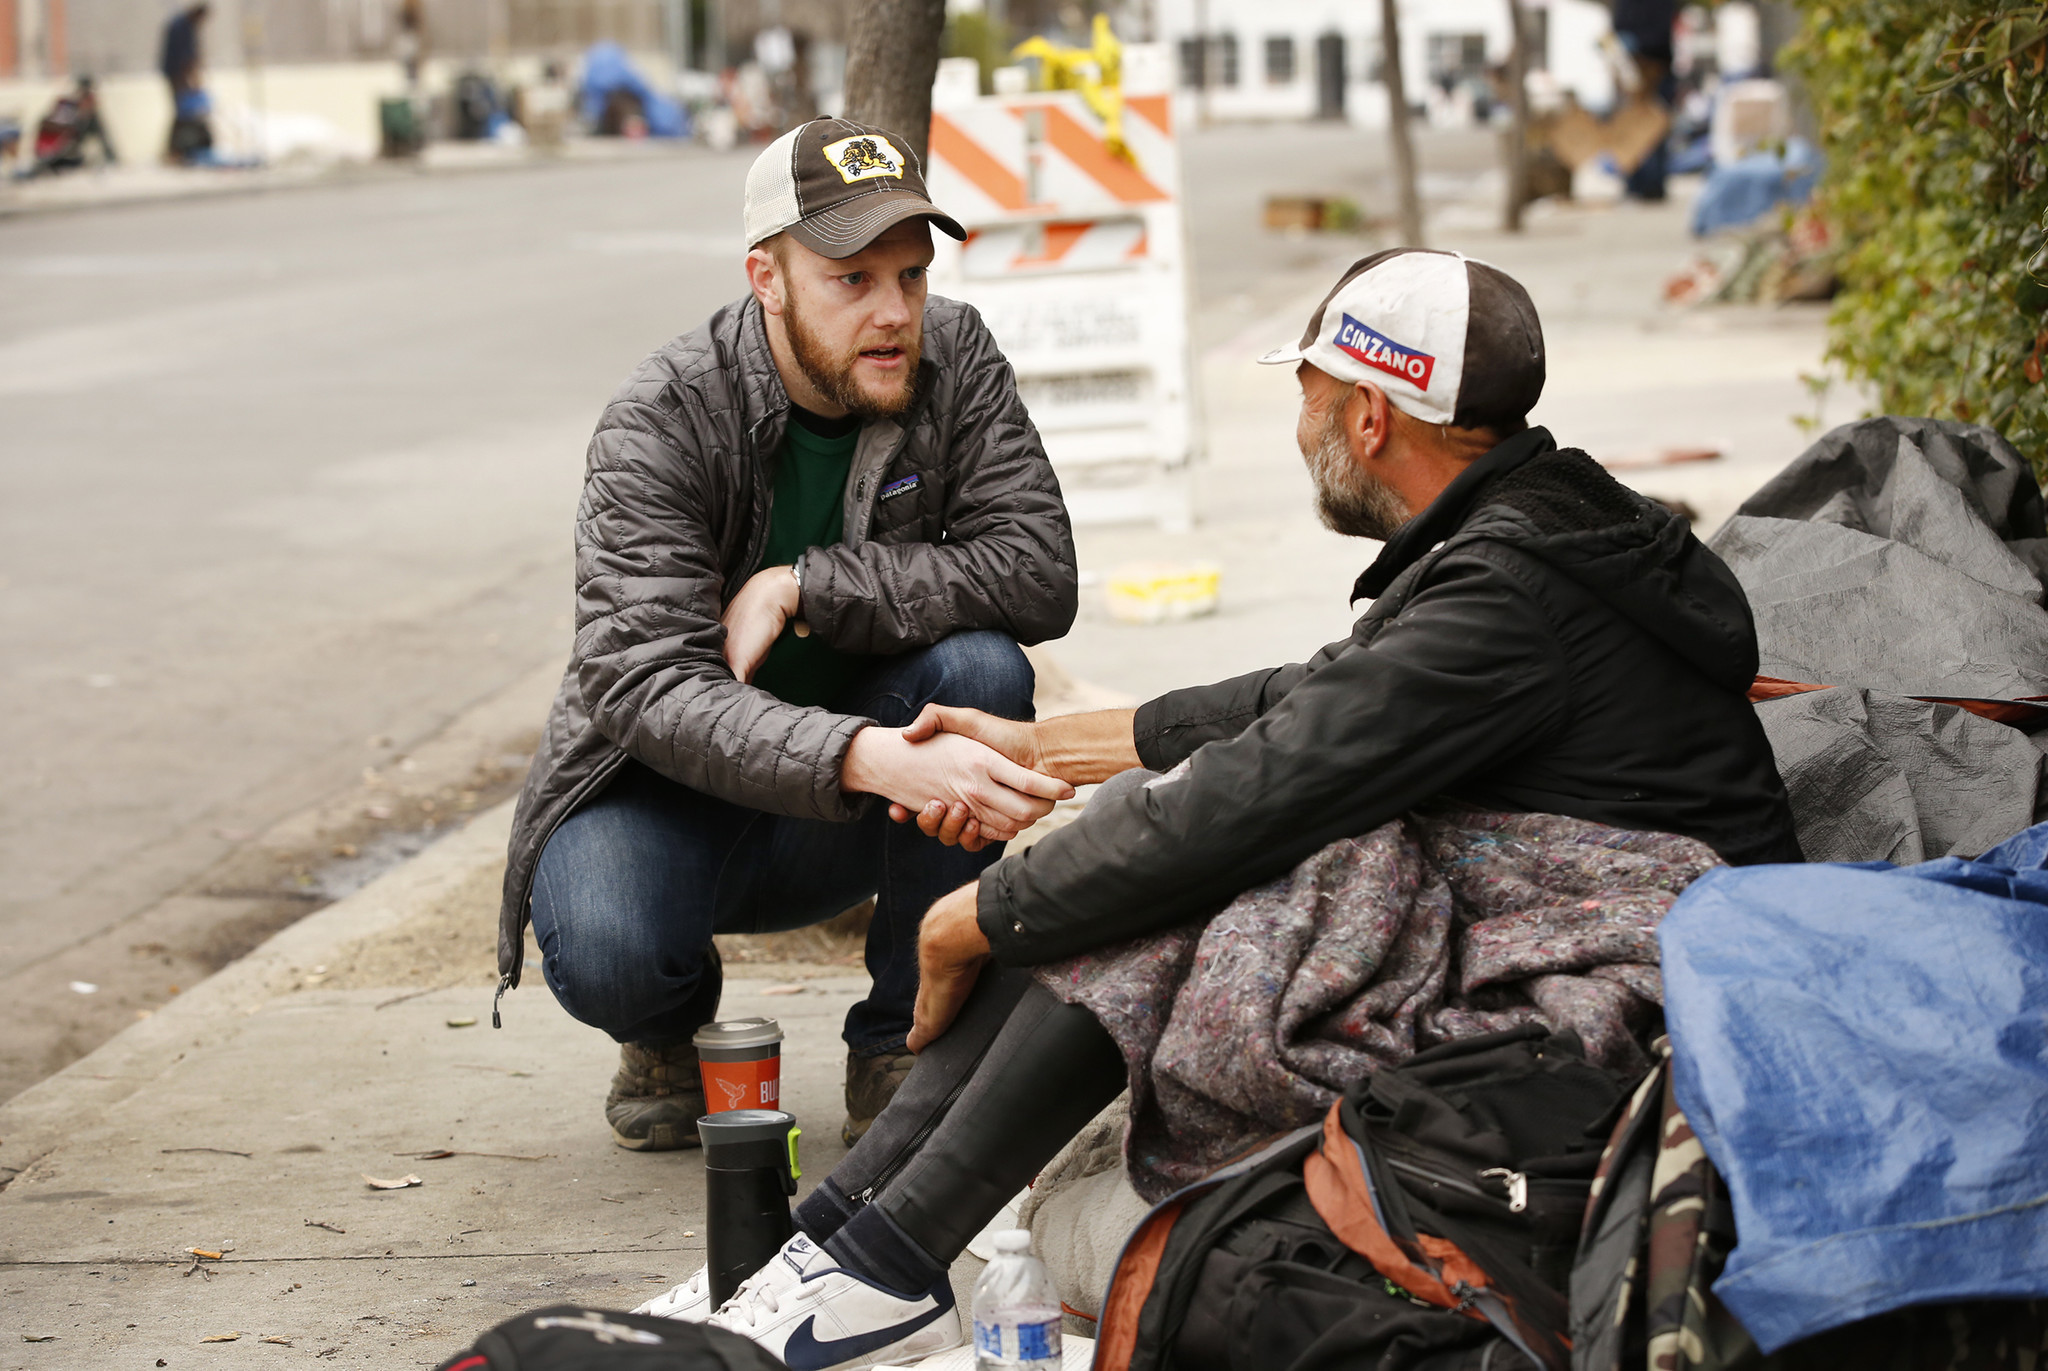 4-simple-things-you-can-do-to-support-people-experiencing-homelessness